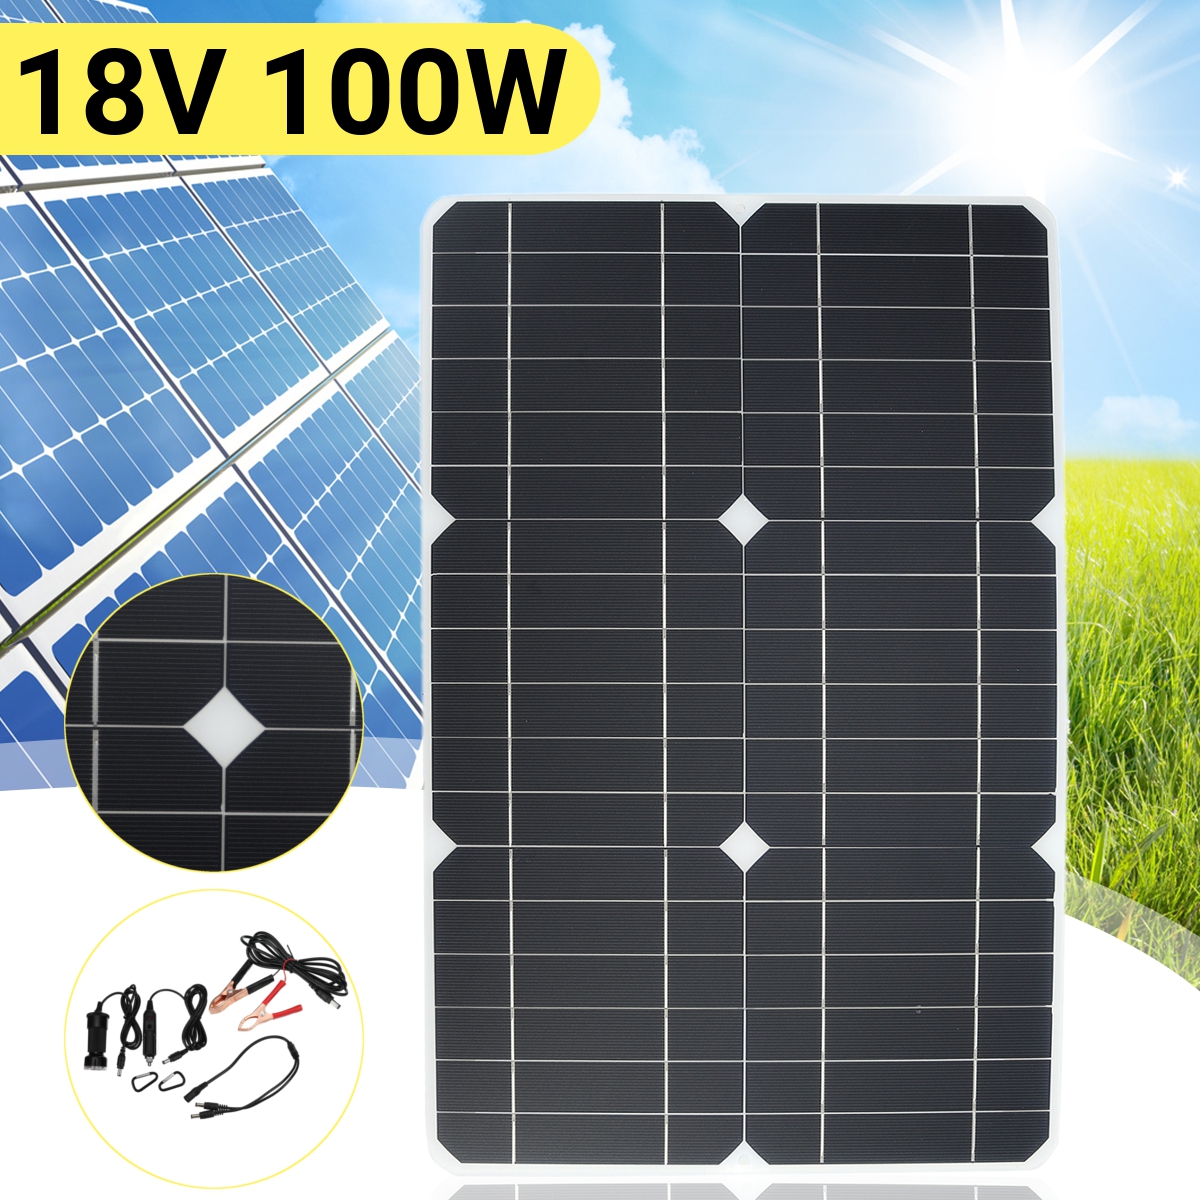 100W-18V-Solar-Panel-Monocrystalline-Silicon-Battery-Charger-Kit-for-Cycling-Climbing-Hiking-Camping-1778312-2